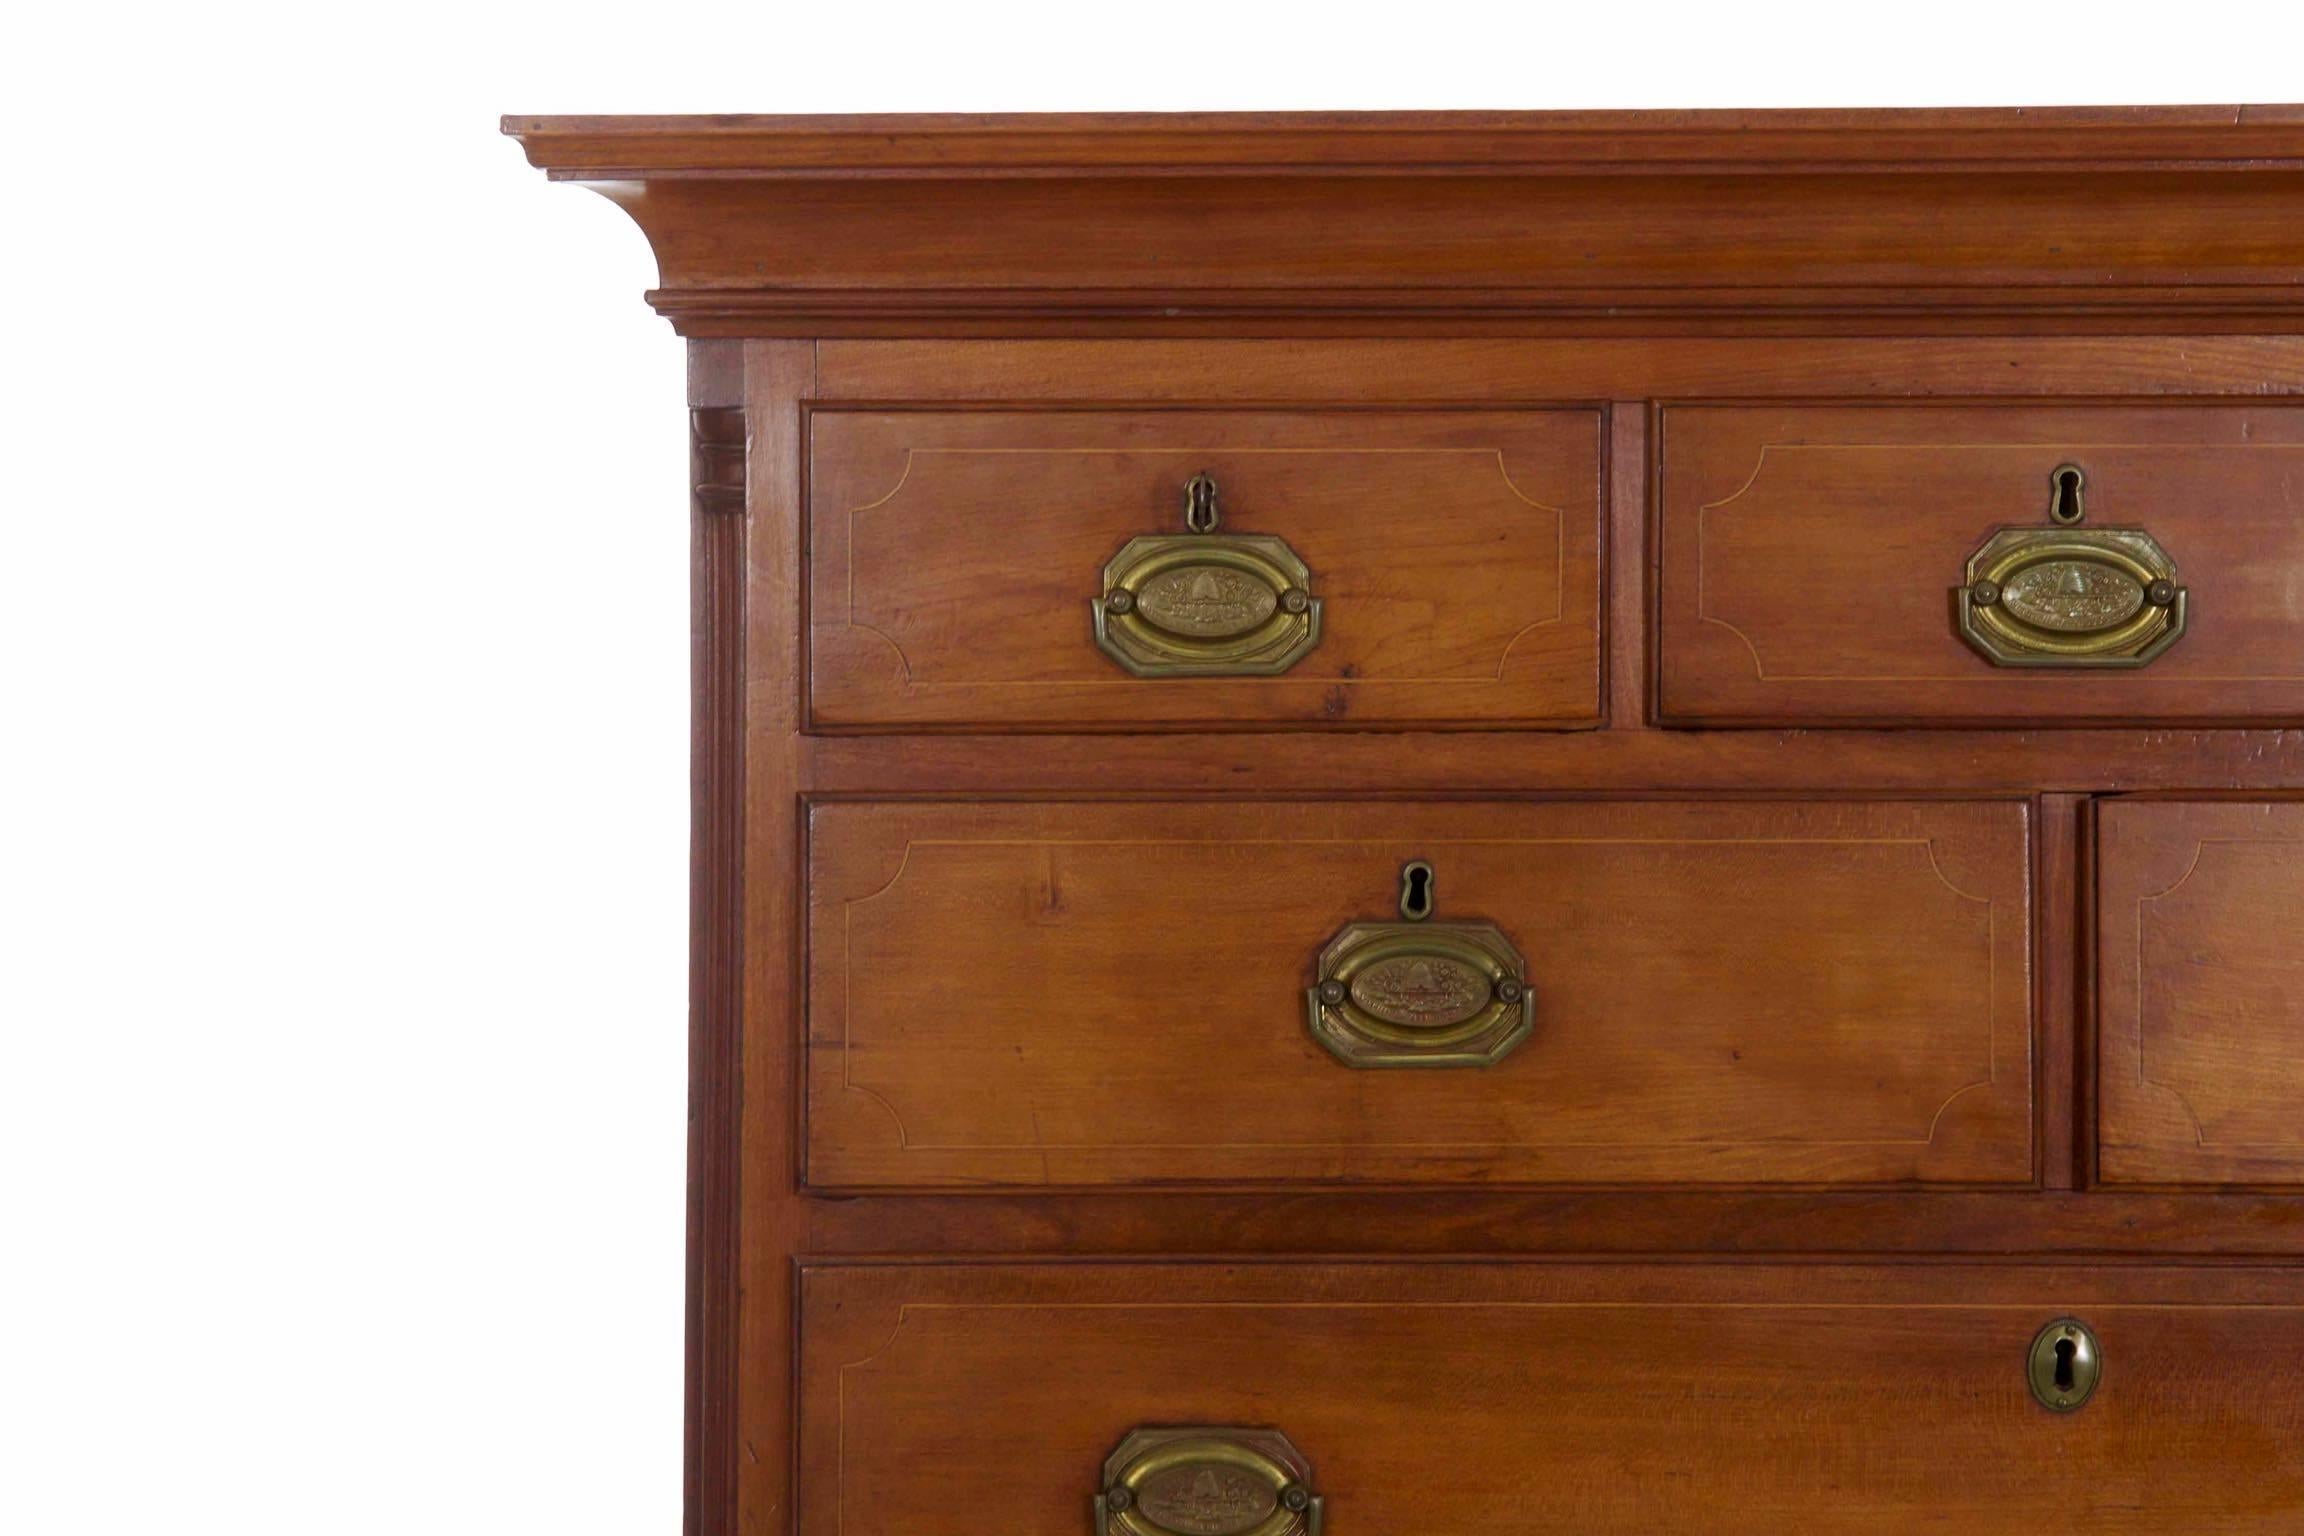 Late 18th Century American Chippendale Cherrywood Tall Chest of Drawers, Pennsylvania